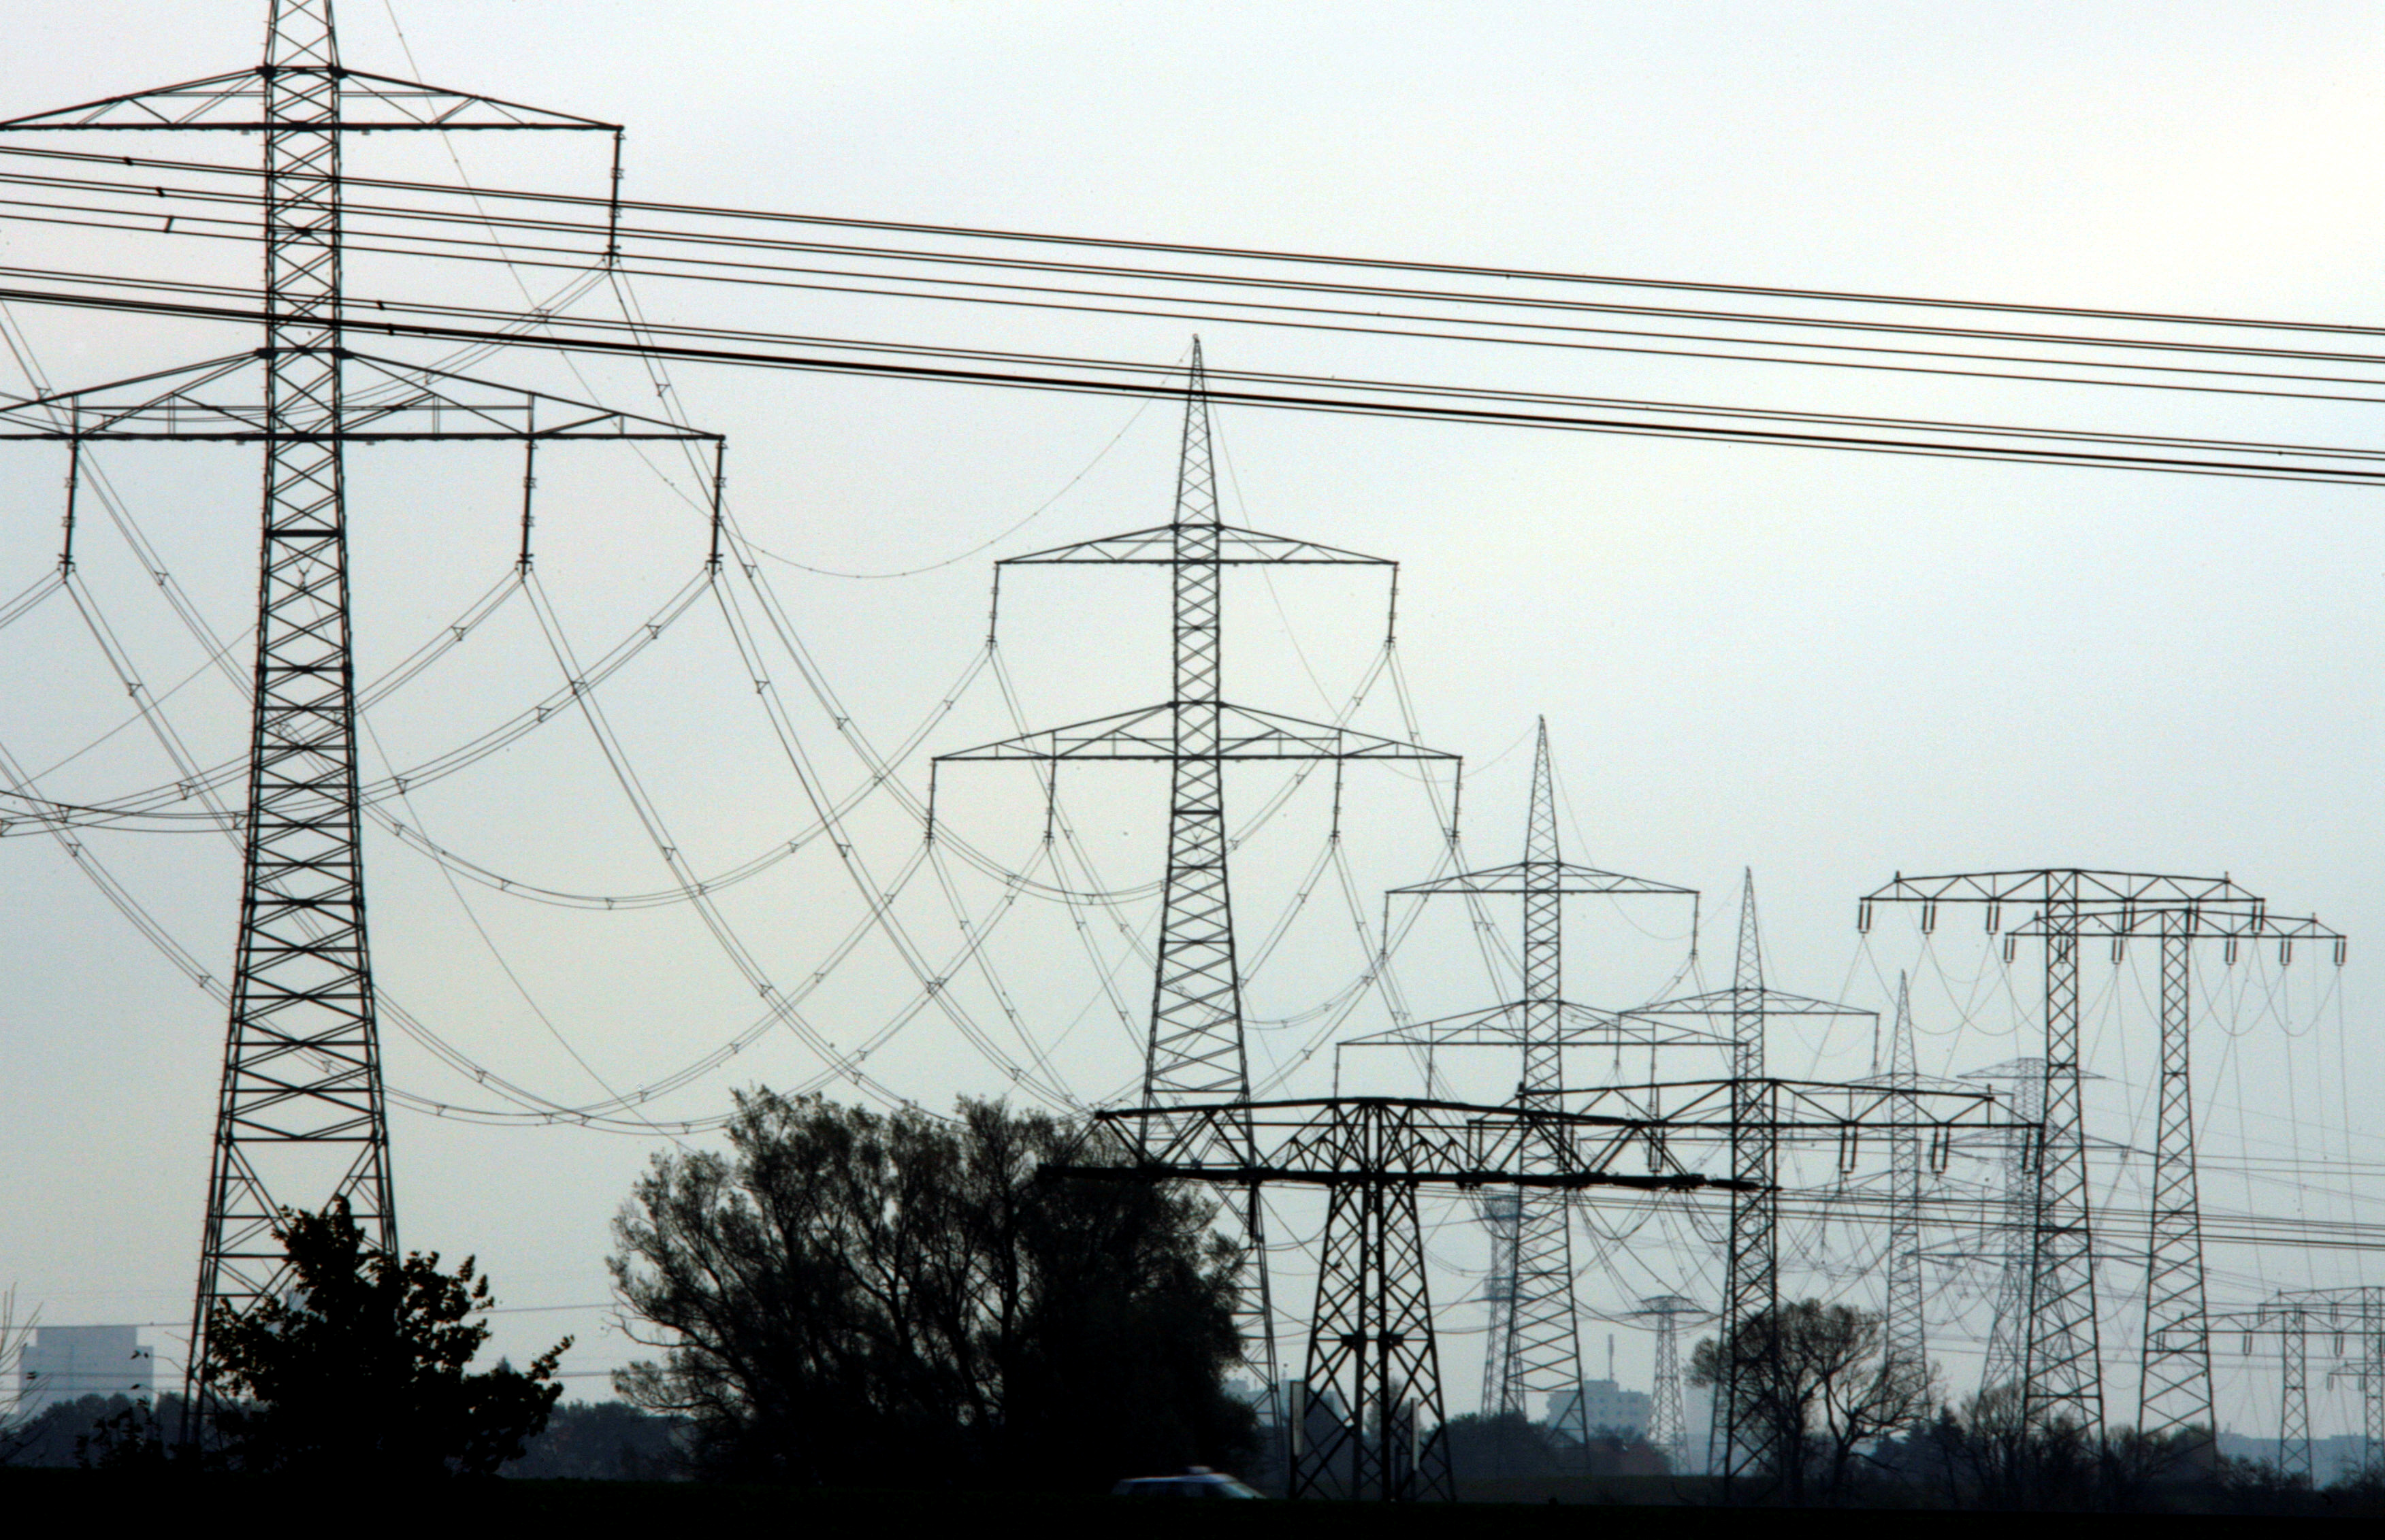 High-voltage power lines and electricity pylons pictured near Berlin, November 7, 2006. REUTERS/Pawel Kopczynski